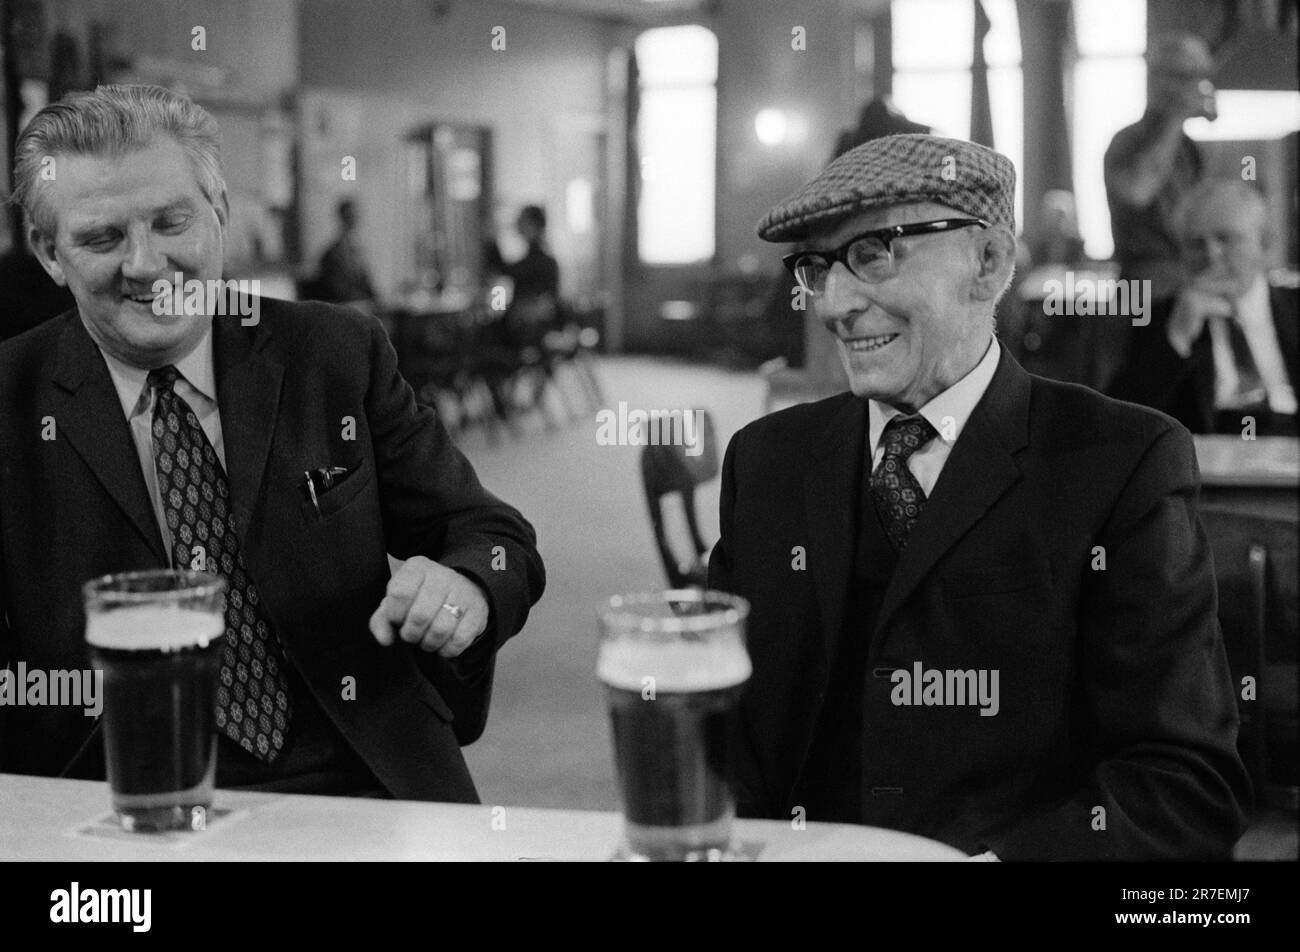 Working Mens Club UK 1970s. Sunday morning drinking, two men wearing their 'Sunday best' clothes. Getting dressed up, in a clean ironed shirt and tie,  and wearing a  sports jacket was normal at the time. Pints of beer at the Byker and St Peters Working Men's Club, Newcastle upon Tyne, Tyne and Wear,  northern England 1973. HOMER SYKES  . Stock Photo